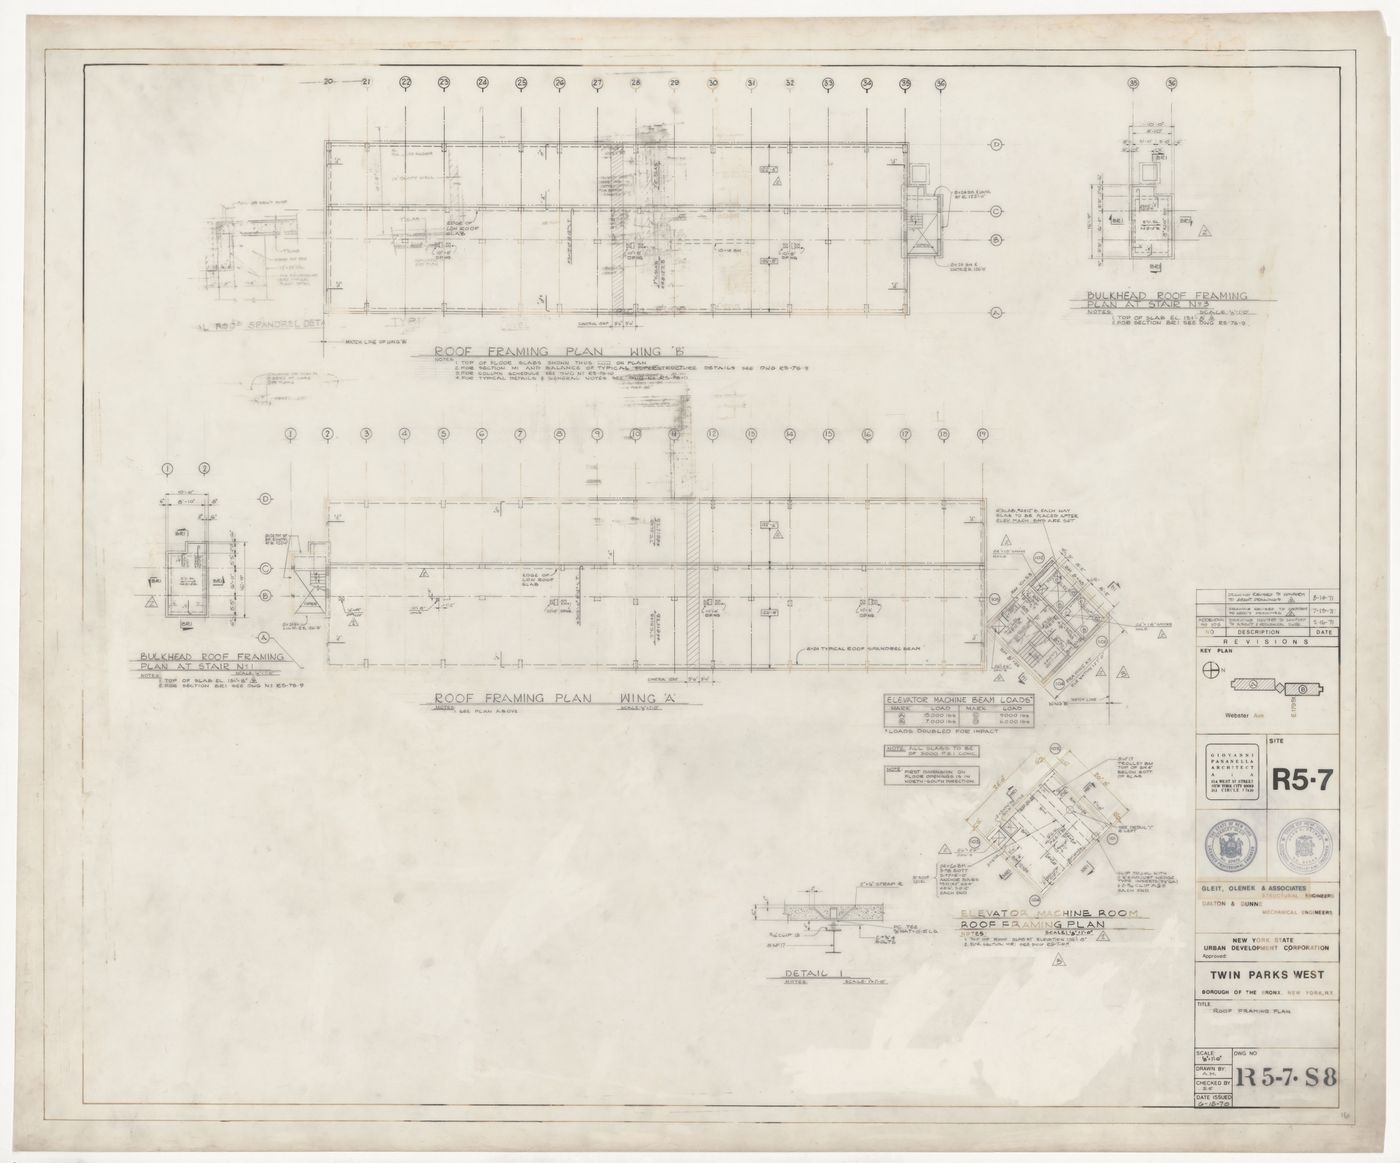 Framing plans for Twin Parks West, Site R5-7, Bronx, New York